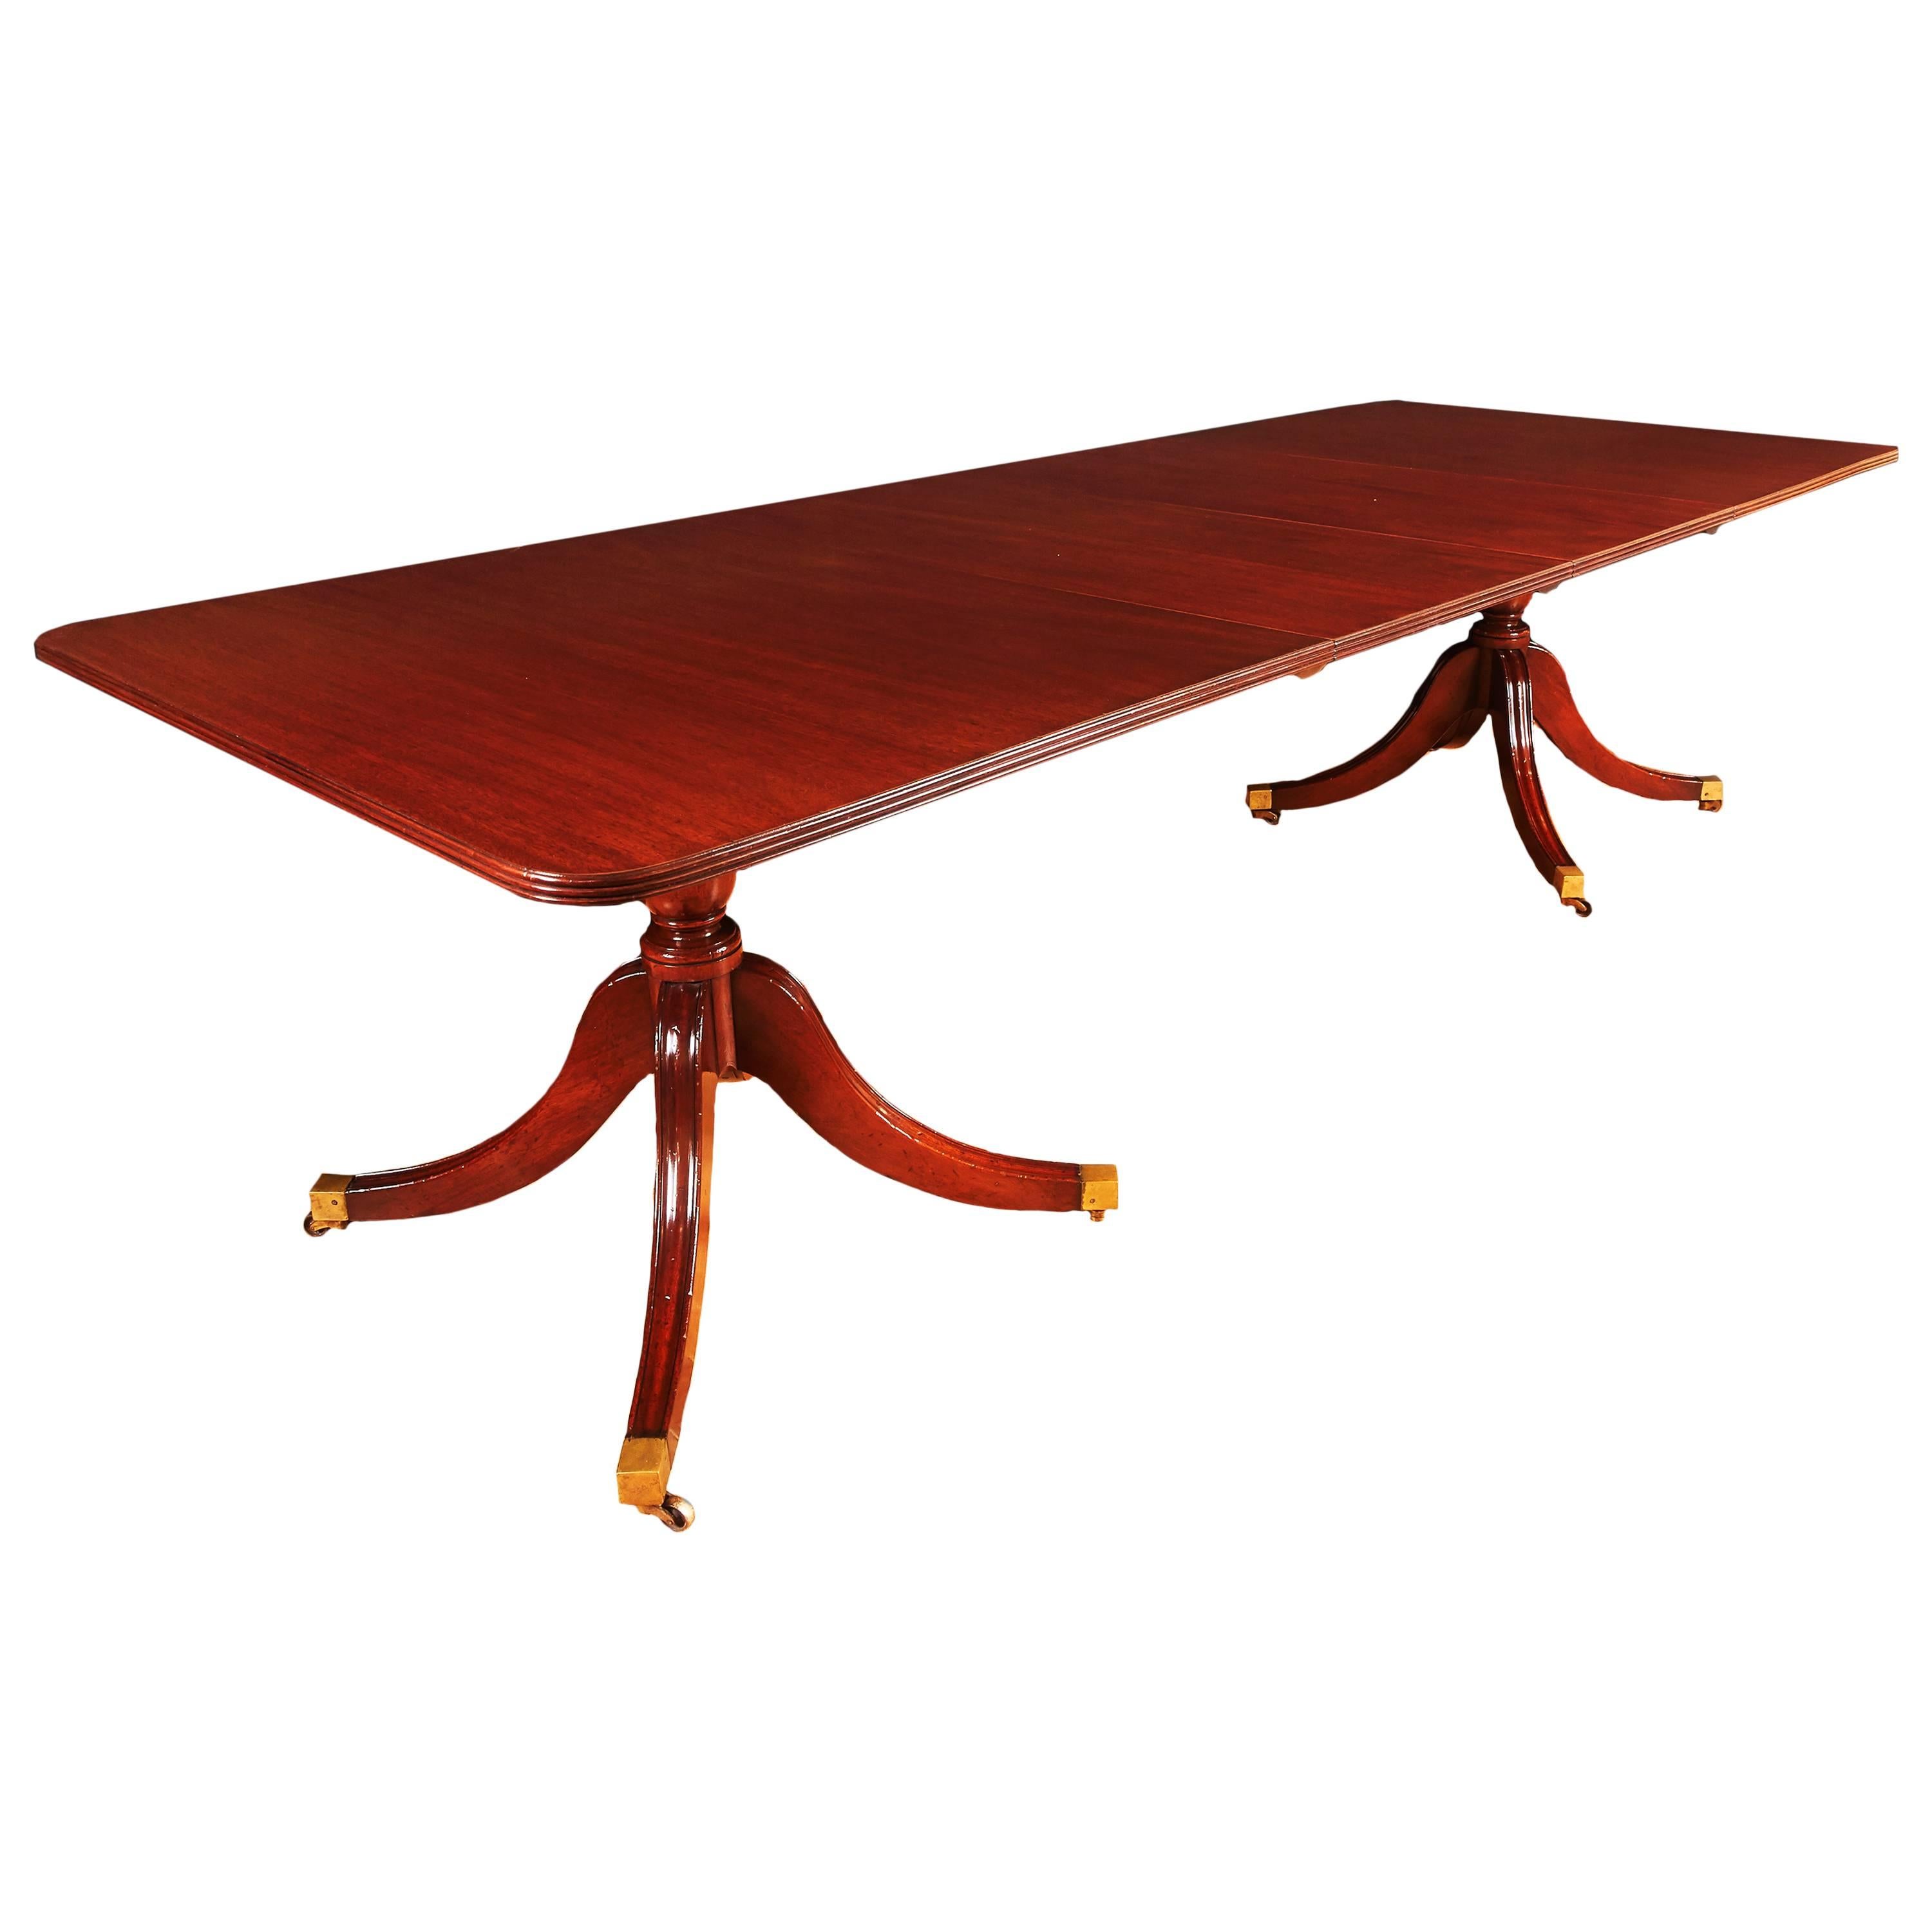 English Mahogany Two Pedestal Dining Table with Three Leaves